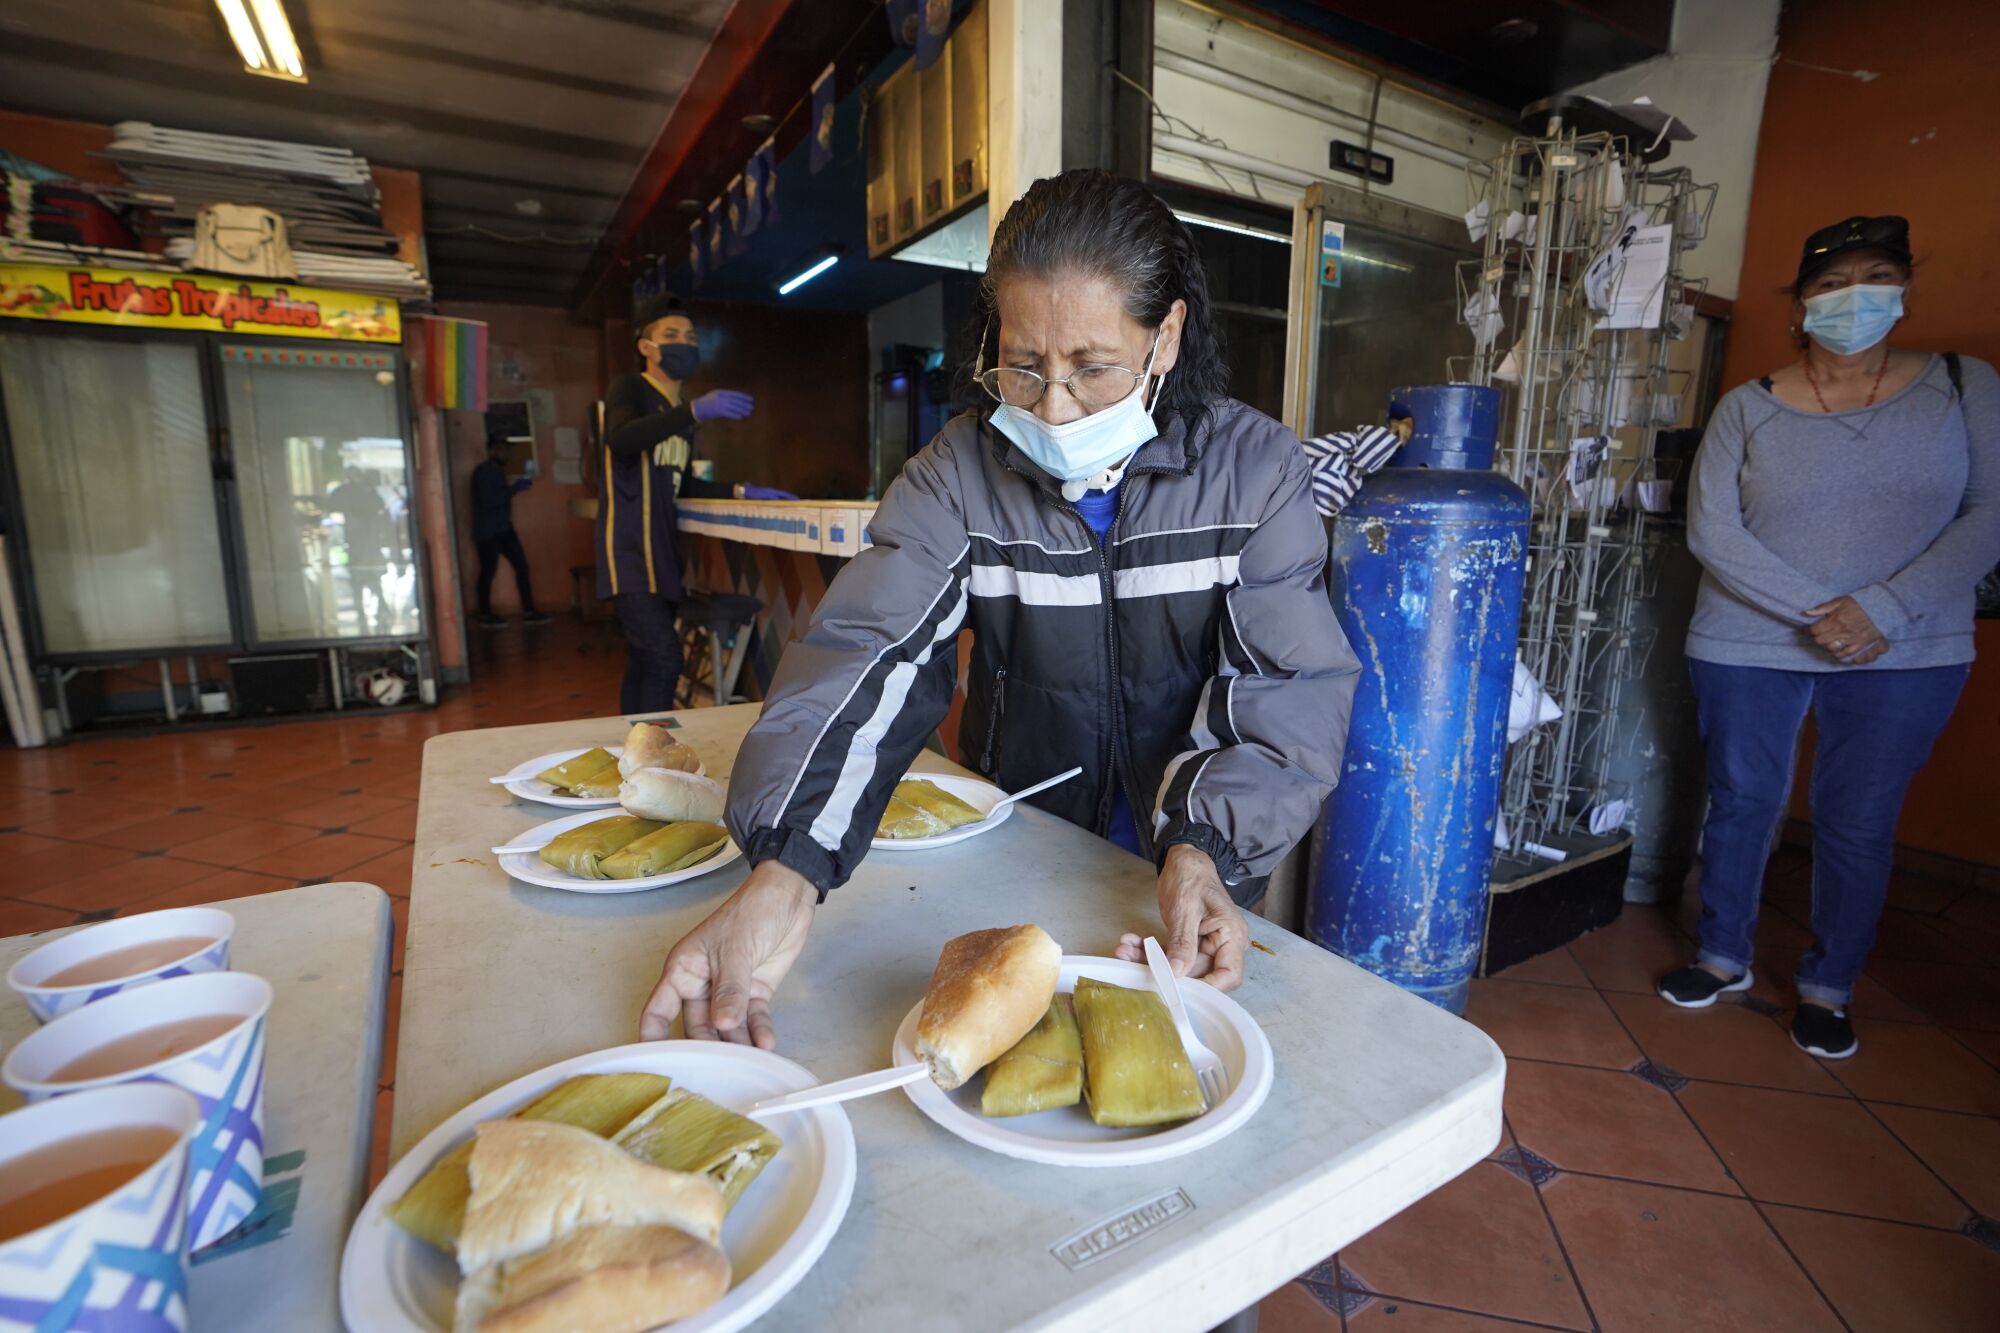 Esther Morales prepares plates of food to hand out at a soup kitchen in Tijuana.